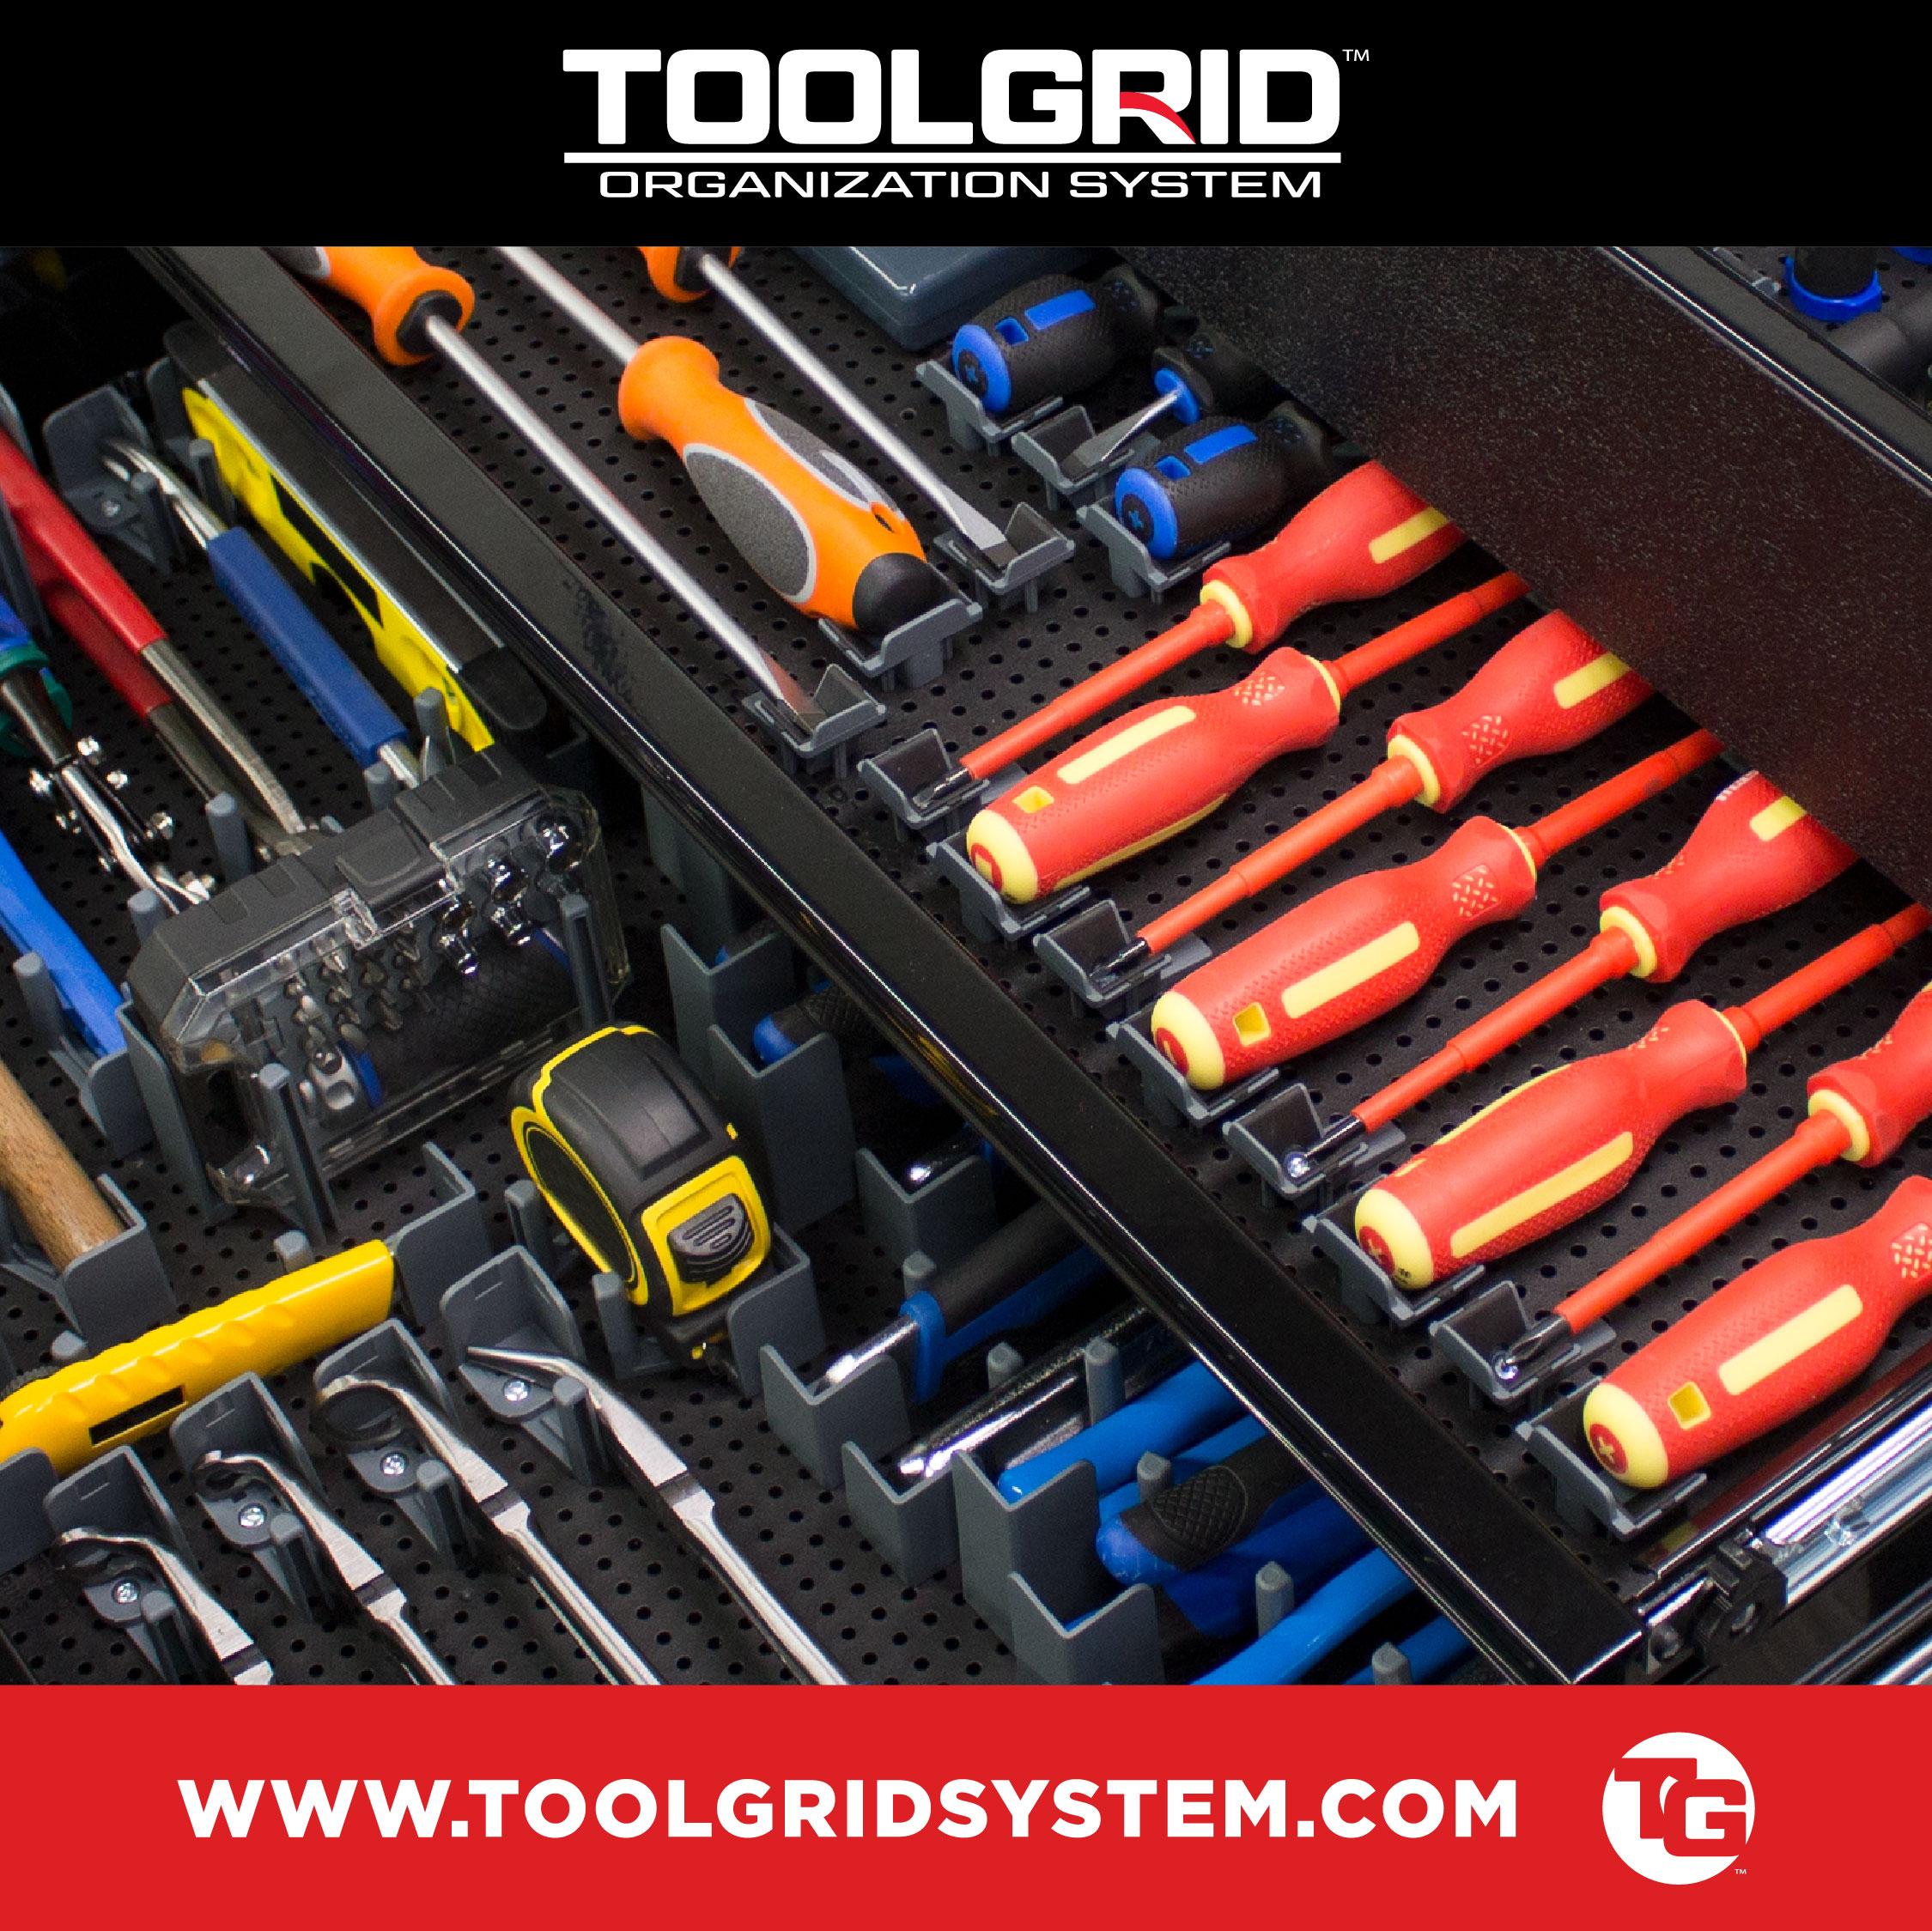 Tool Grid Toolgrid Container Bundle for organizing hardware and